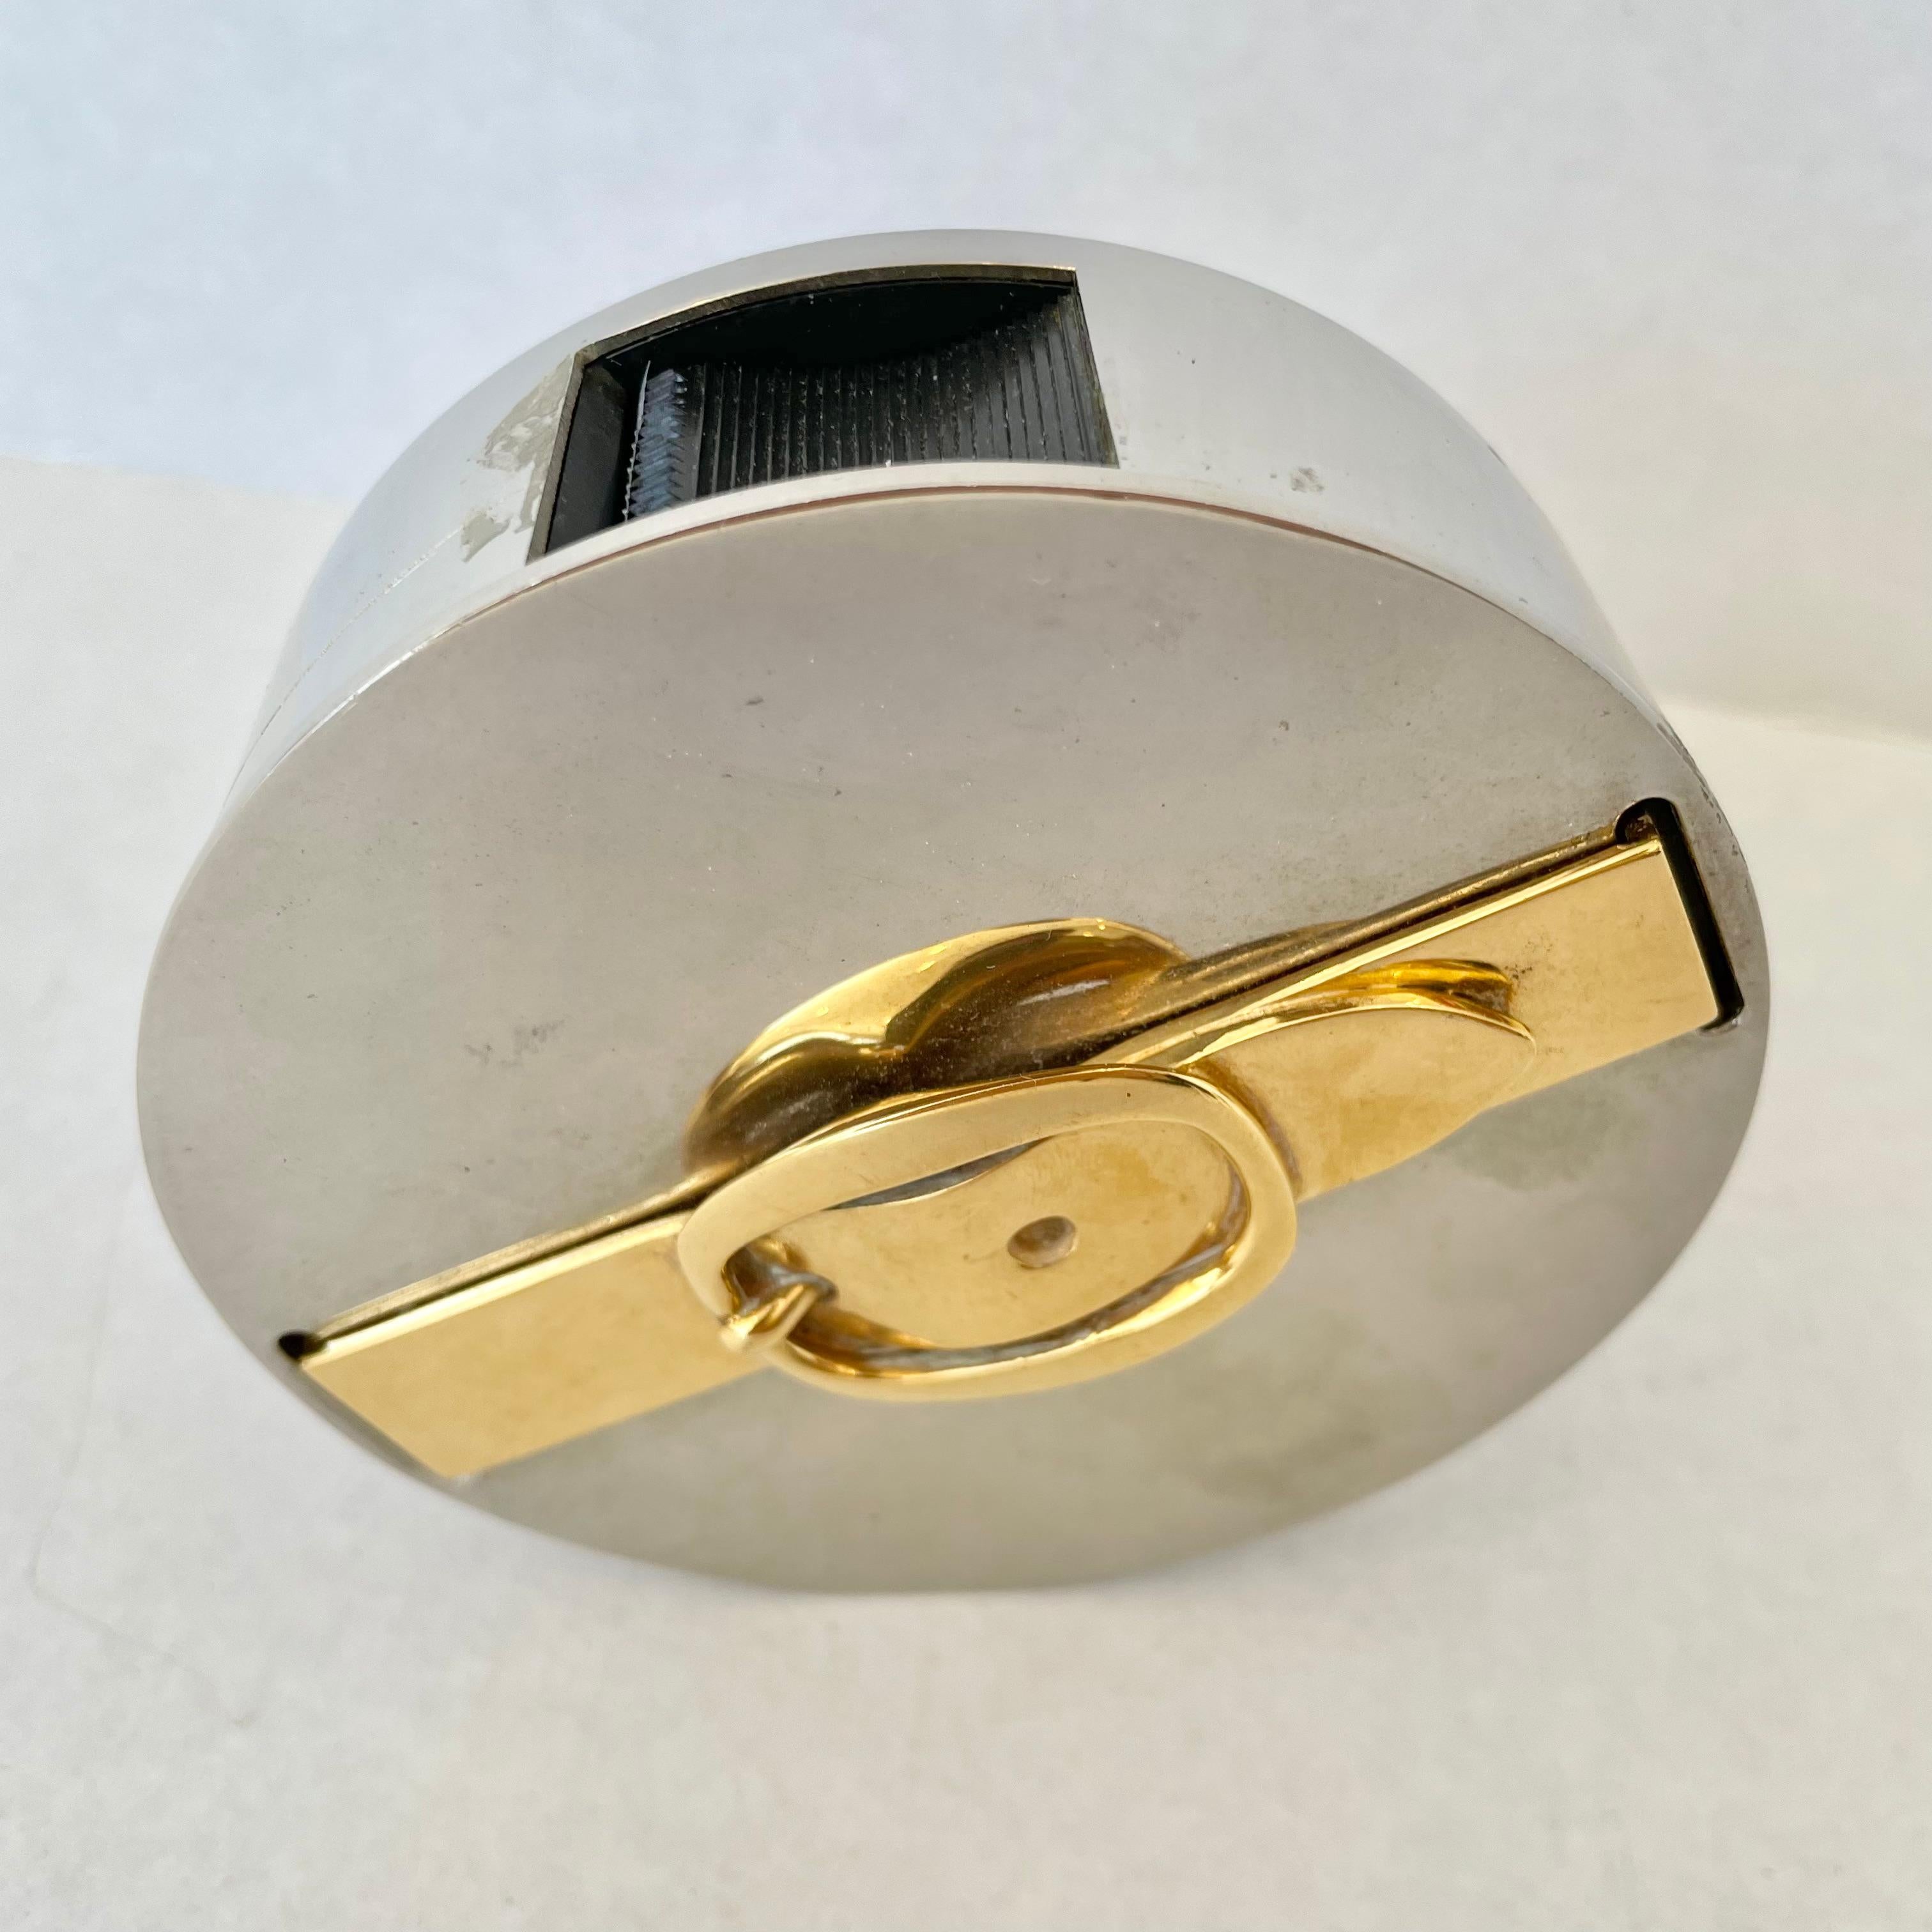 Hermes Tape Dispenser In Good Condition For Sale In Los Angeles, CA